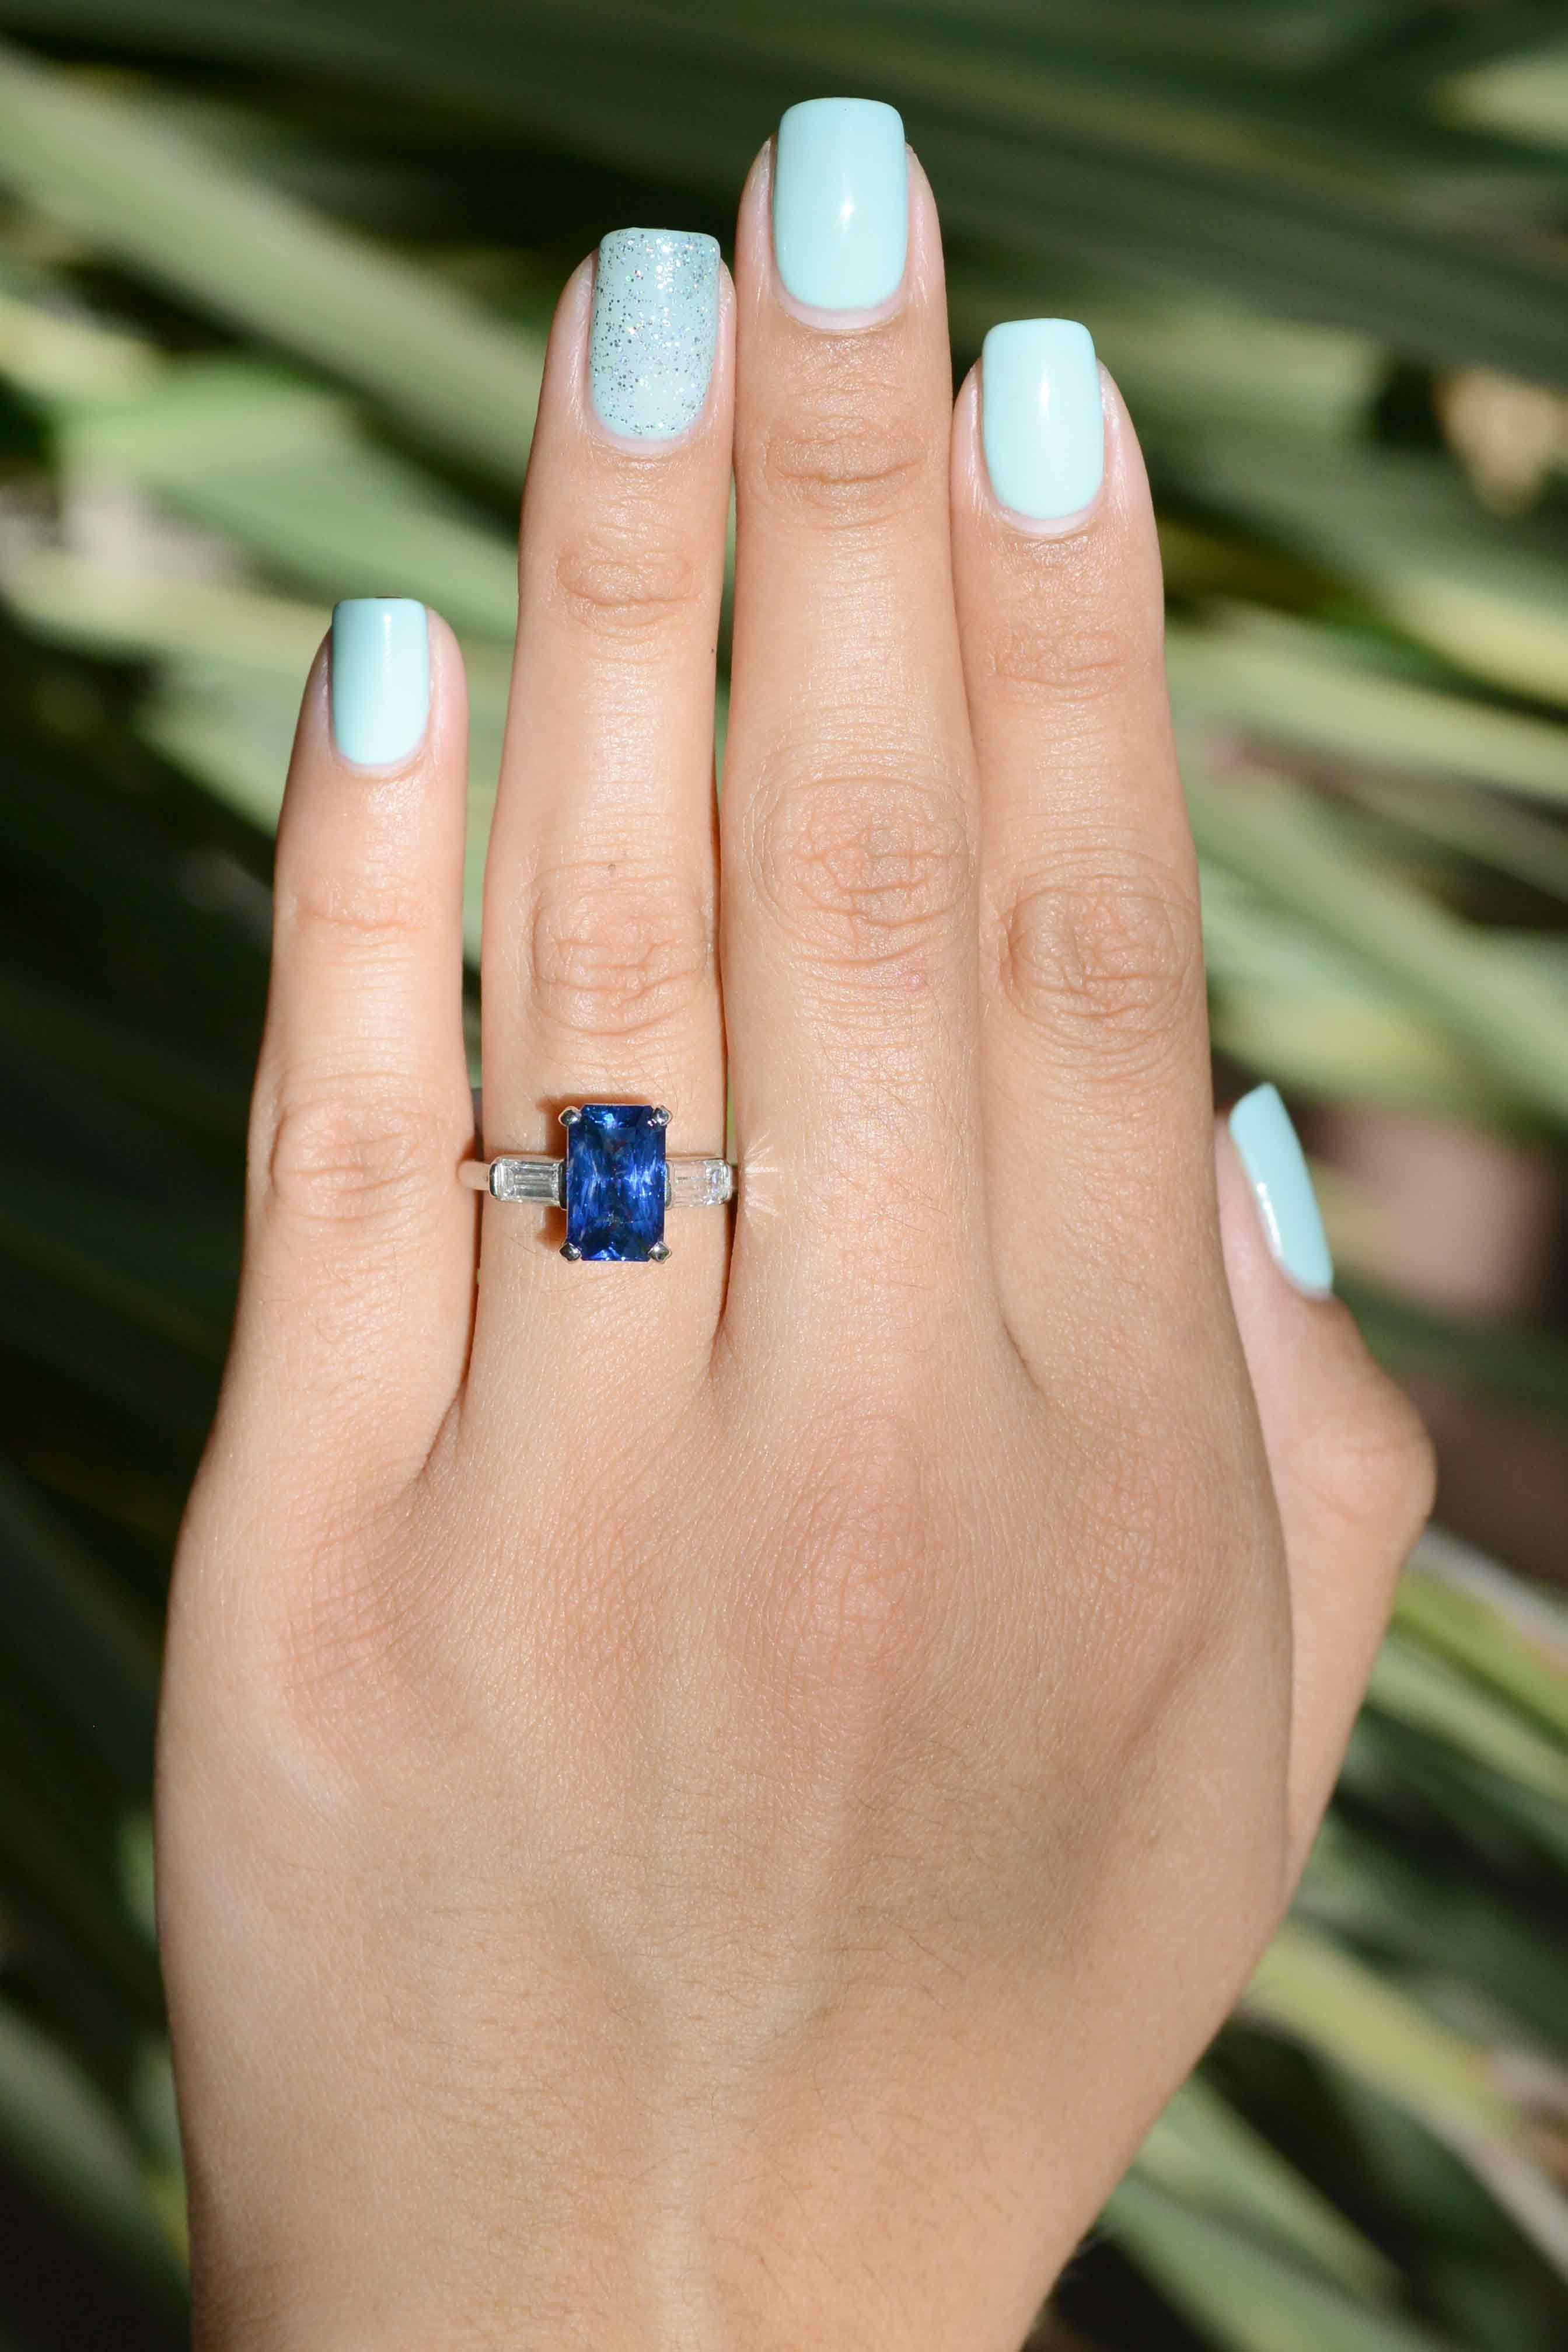 This emerald cut 4.15 carat blue sapphire and diamond engagement ring embodies the reason why we love estate jewelry. The diamond baguettes subtly accentuate the marvelous, captivating blue this sapphire displays.  GIA certified as natural sapphire.